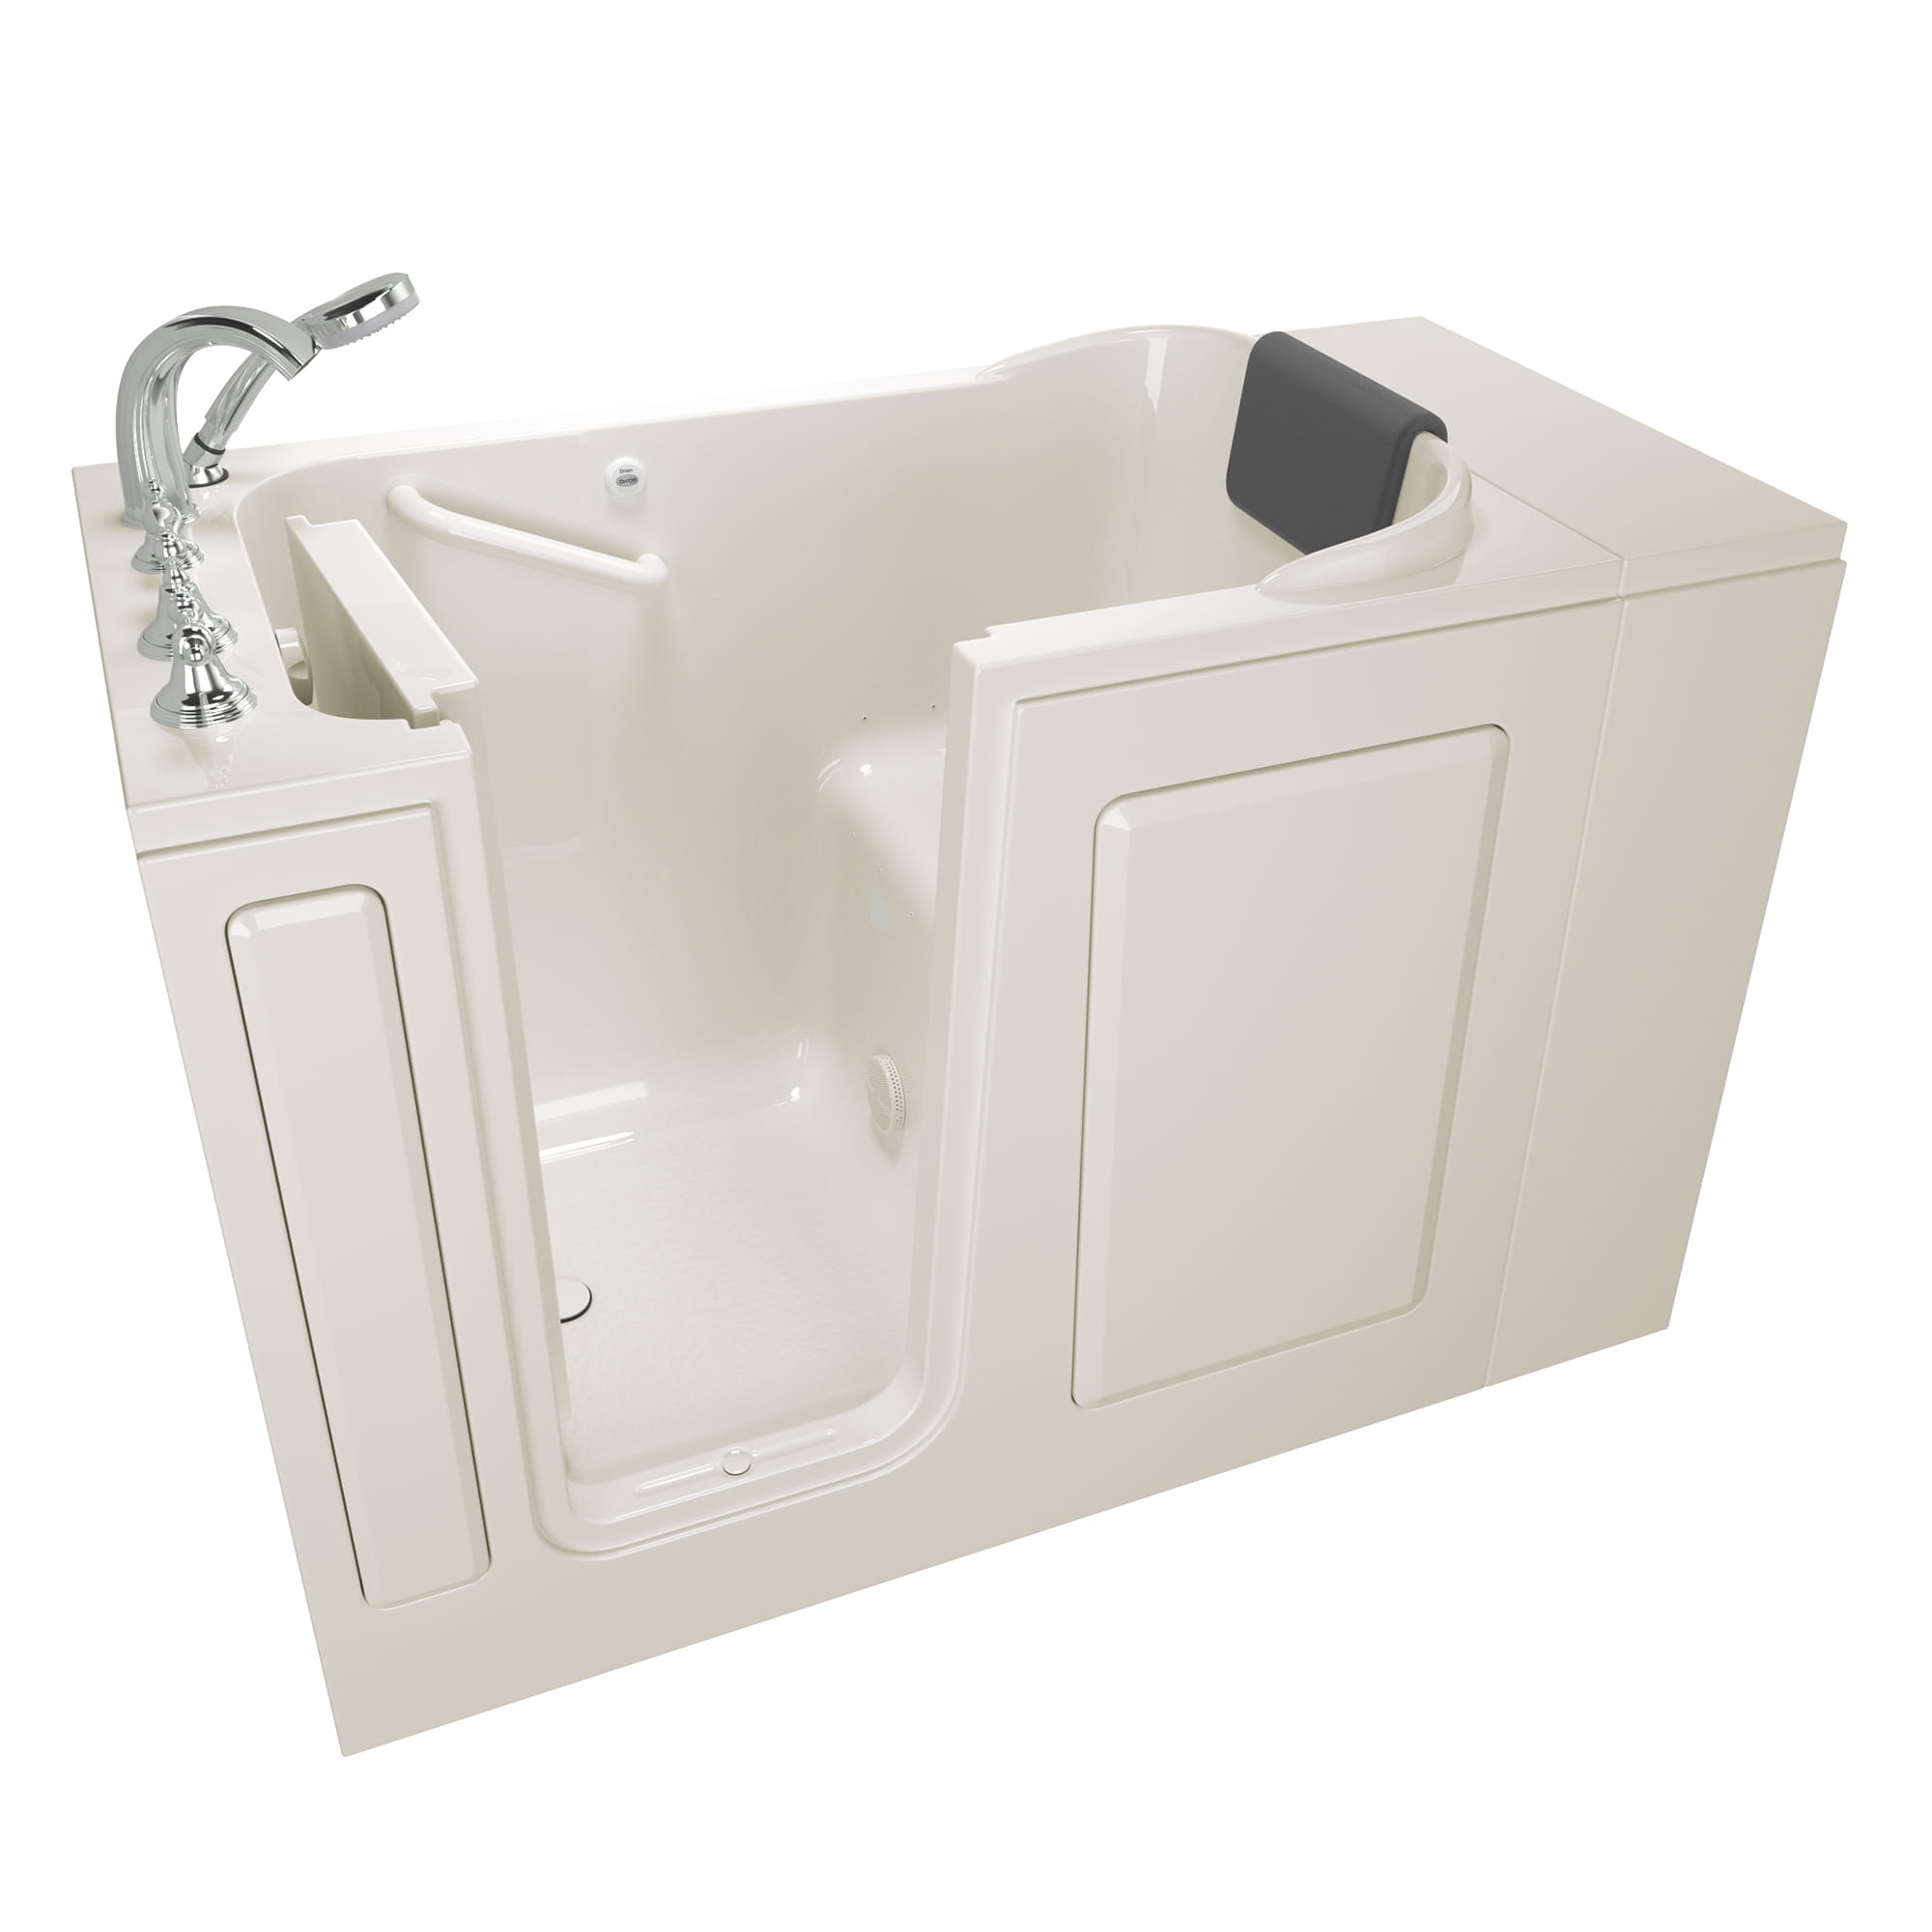 Gelcoat Premium Series 28 x 48-Inch Walk-in Tub With Soaker System - Left-Hand Drain With Faucet